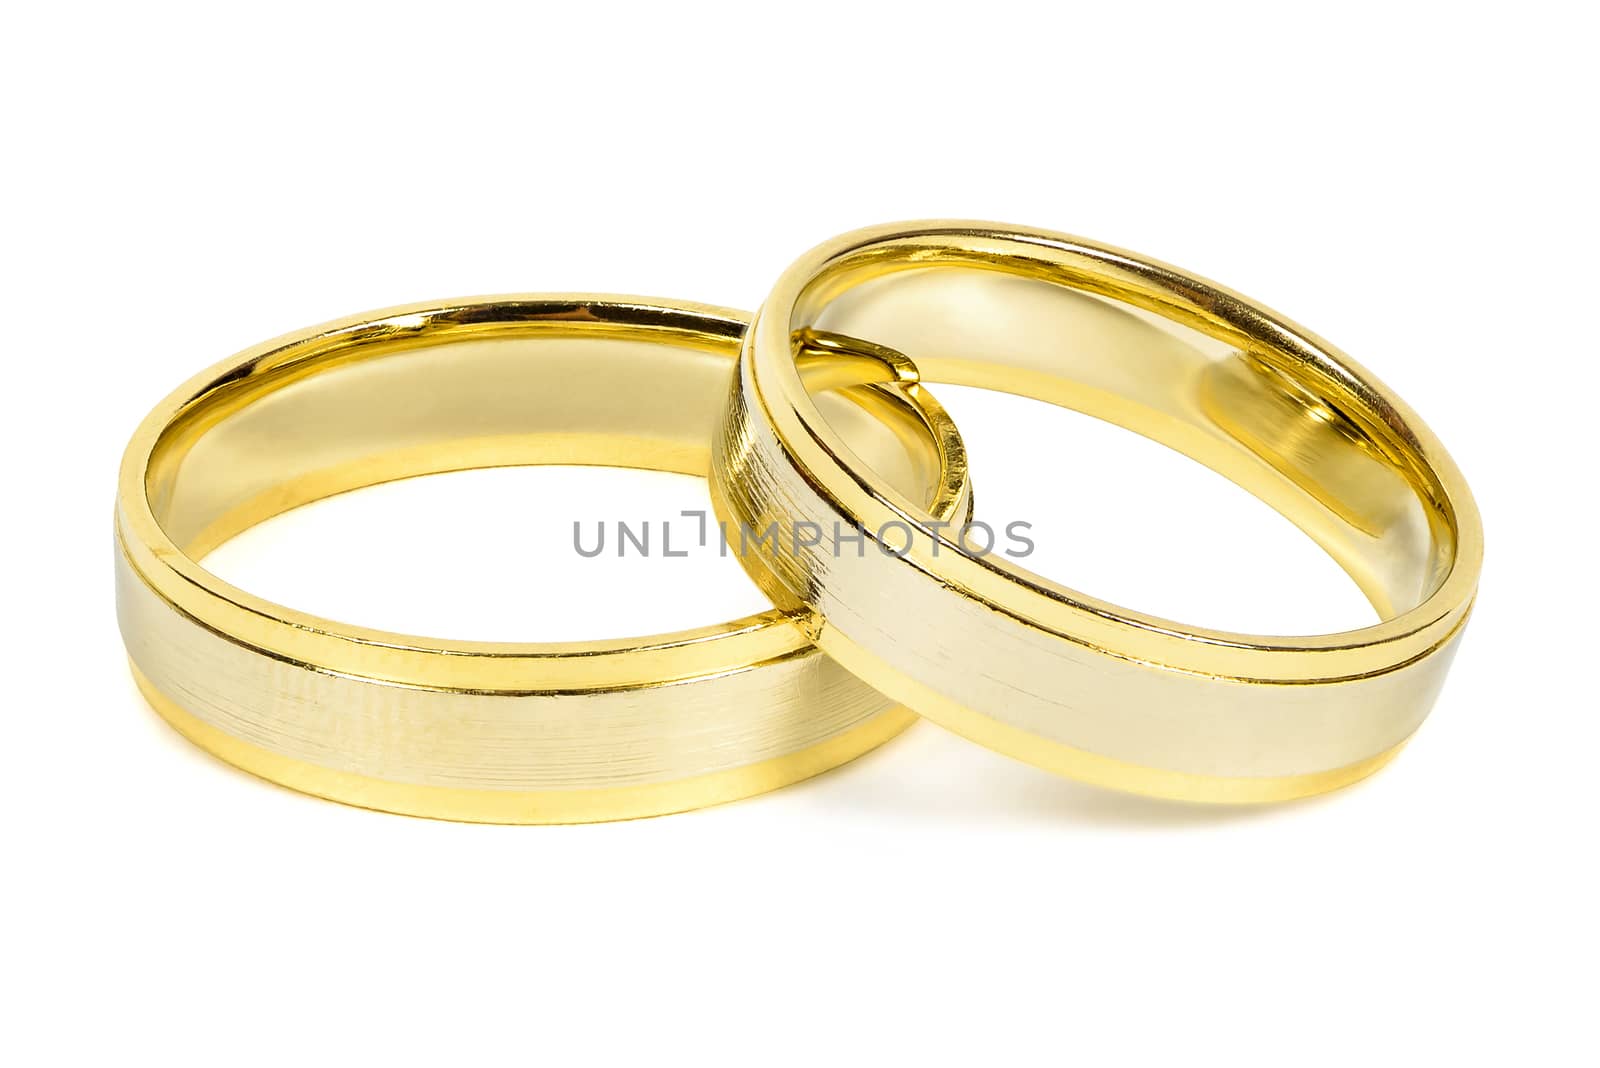 Wedding rings on white background by mkos83